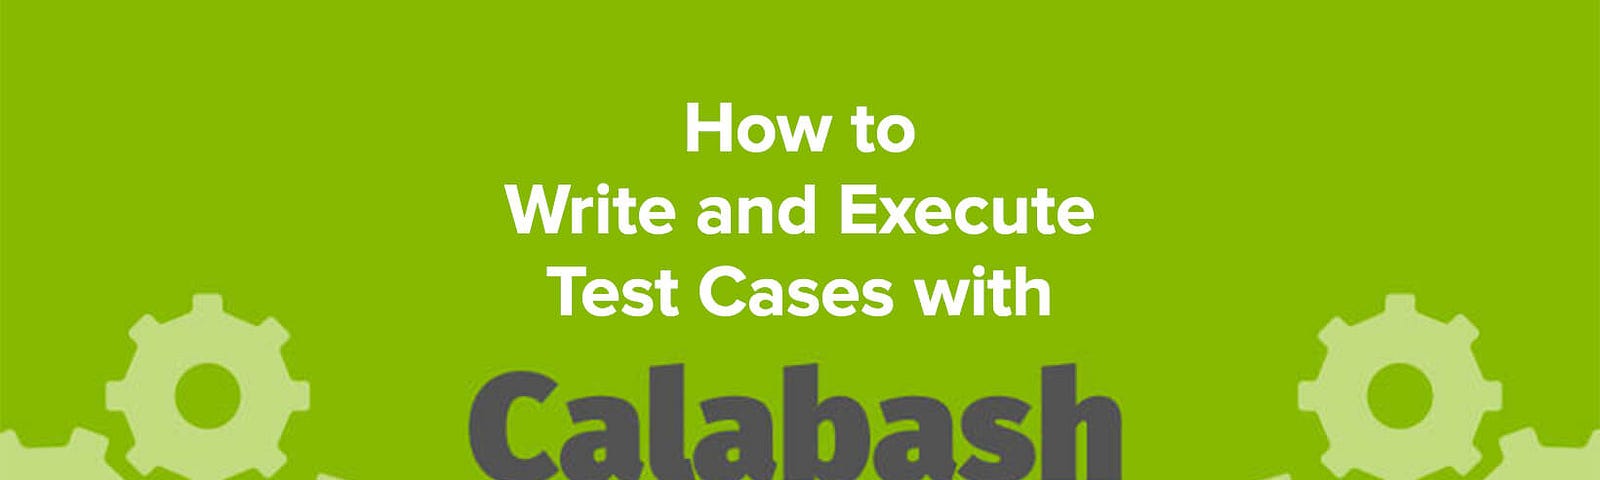 writing-and-executing-test-cases-with-calabash